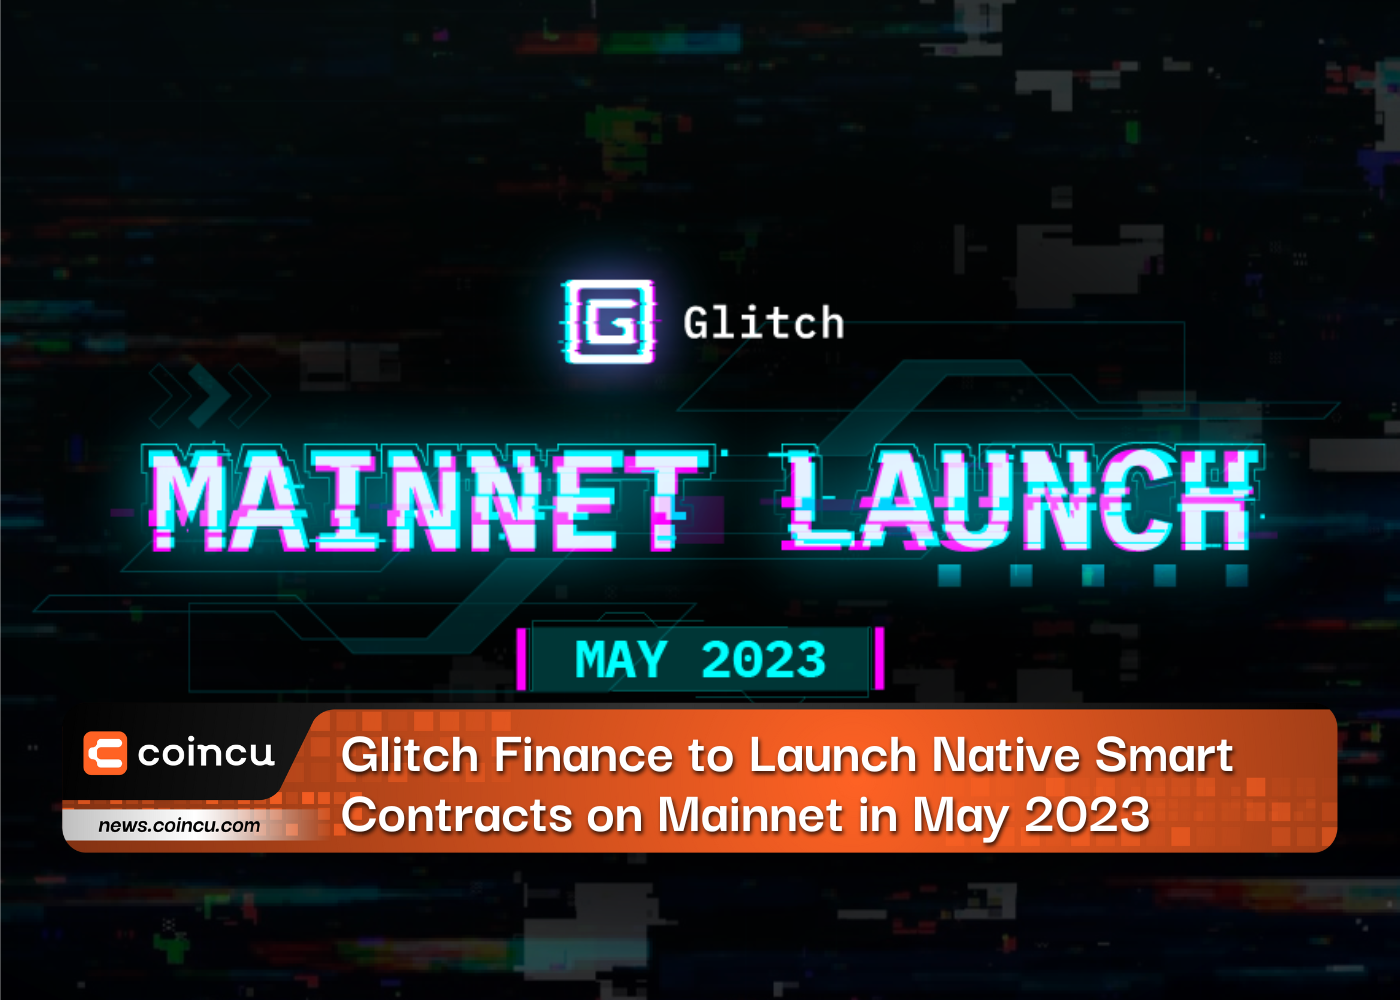 Glitch Finance to Launch Native Smart Contracts on Mainnet in May 2023